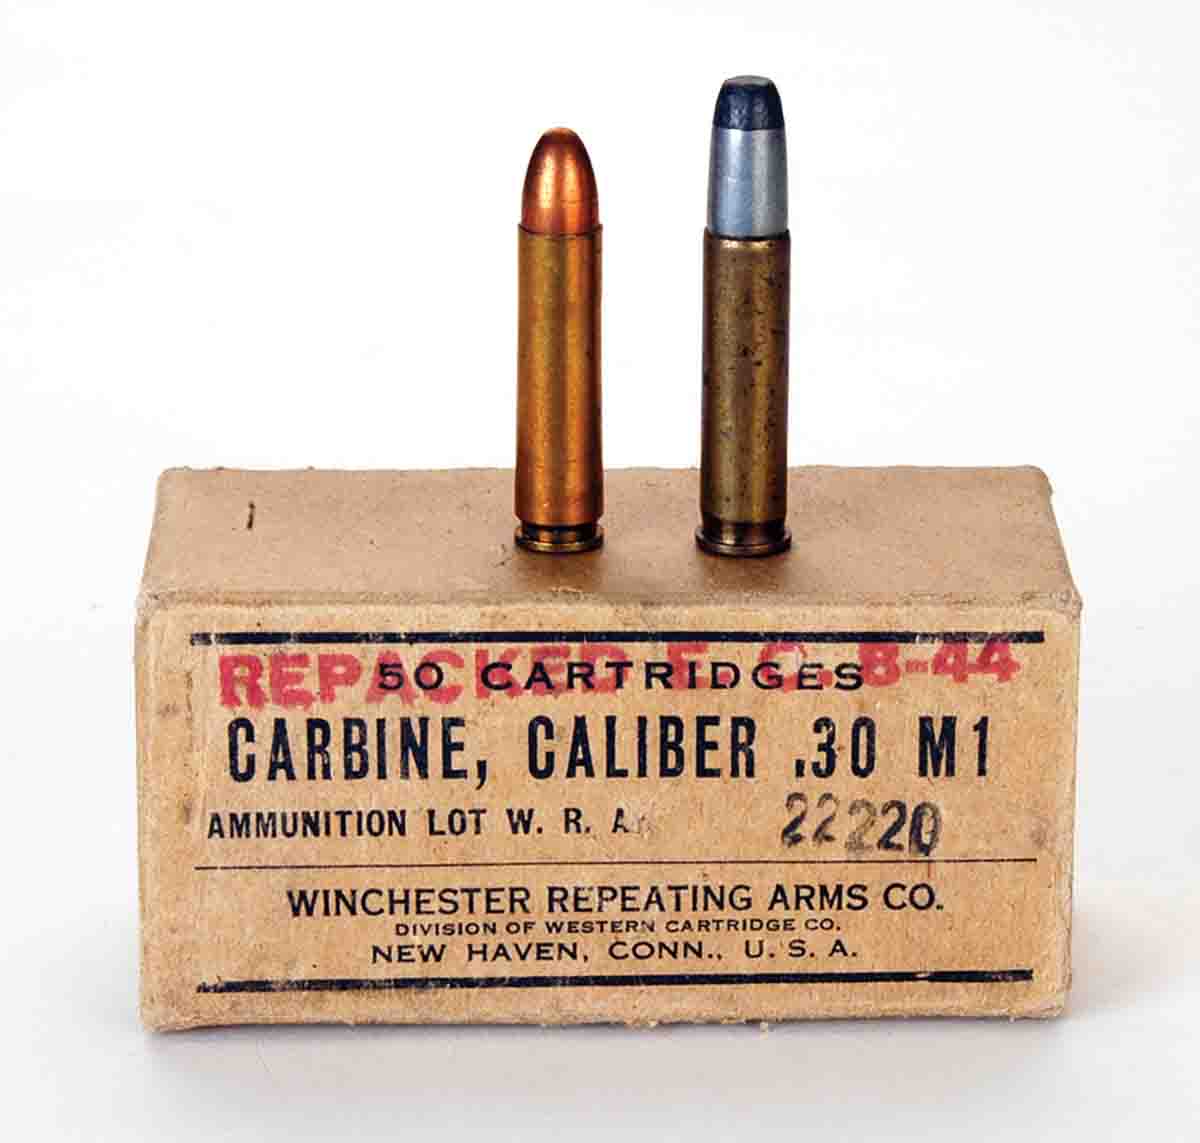 When the U.S. government decided on a new “light rifle” concept, first it needed a suitable cartridge and asked Winchester  to develop it loosely based on the already existing .32 Winchester Self-Loading (WSL).